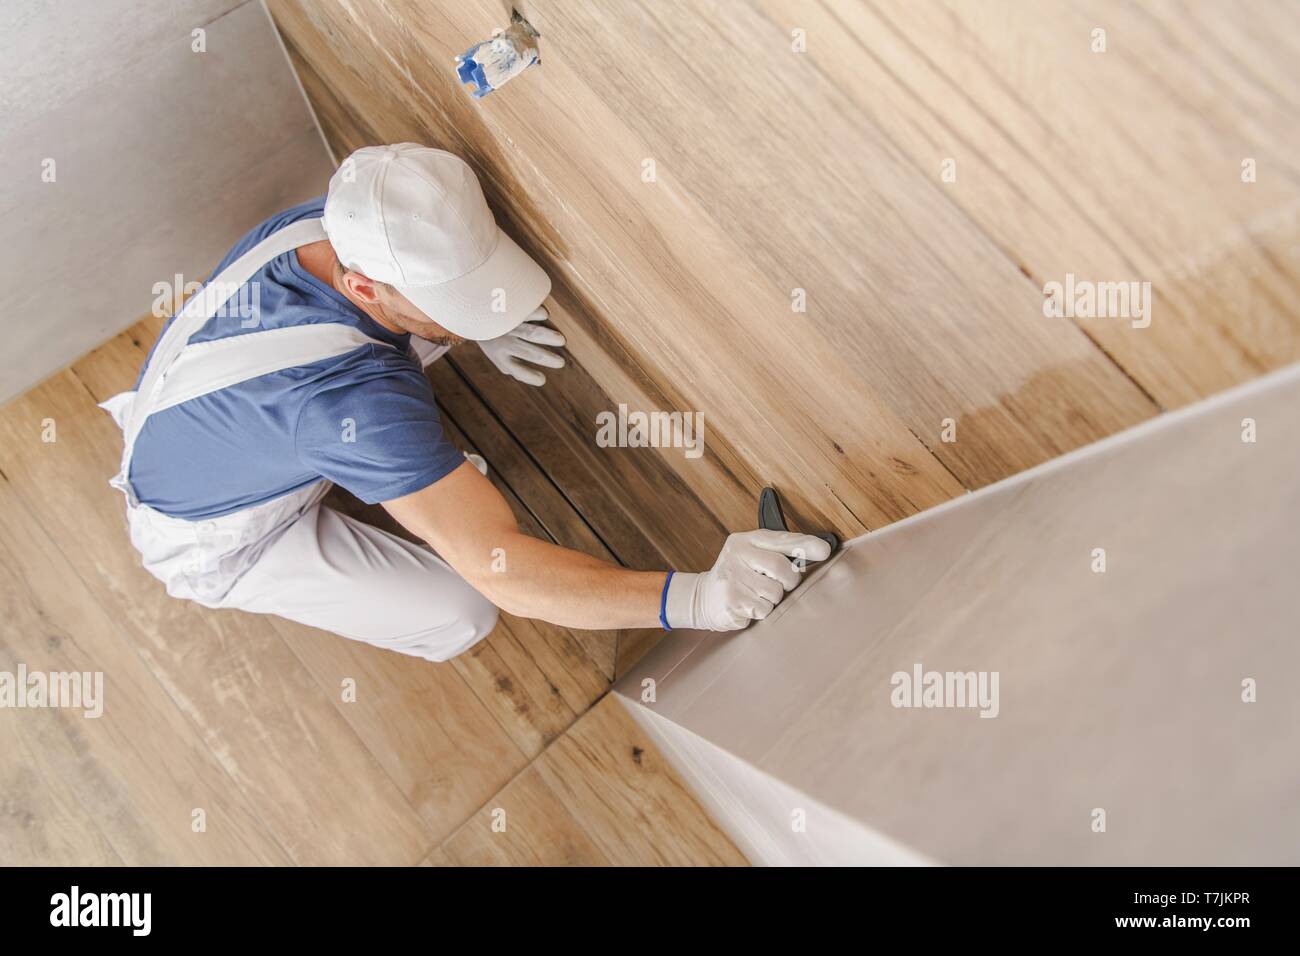 Sealing Finished Ceramic Tiles Bathroom Shower Cabin. Caucasian Construction Worker in HIs 30s. Industrial Theme. Stock Photo